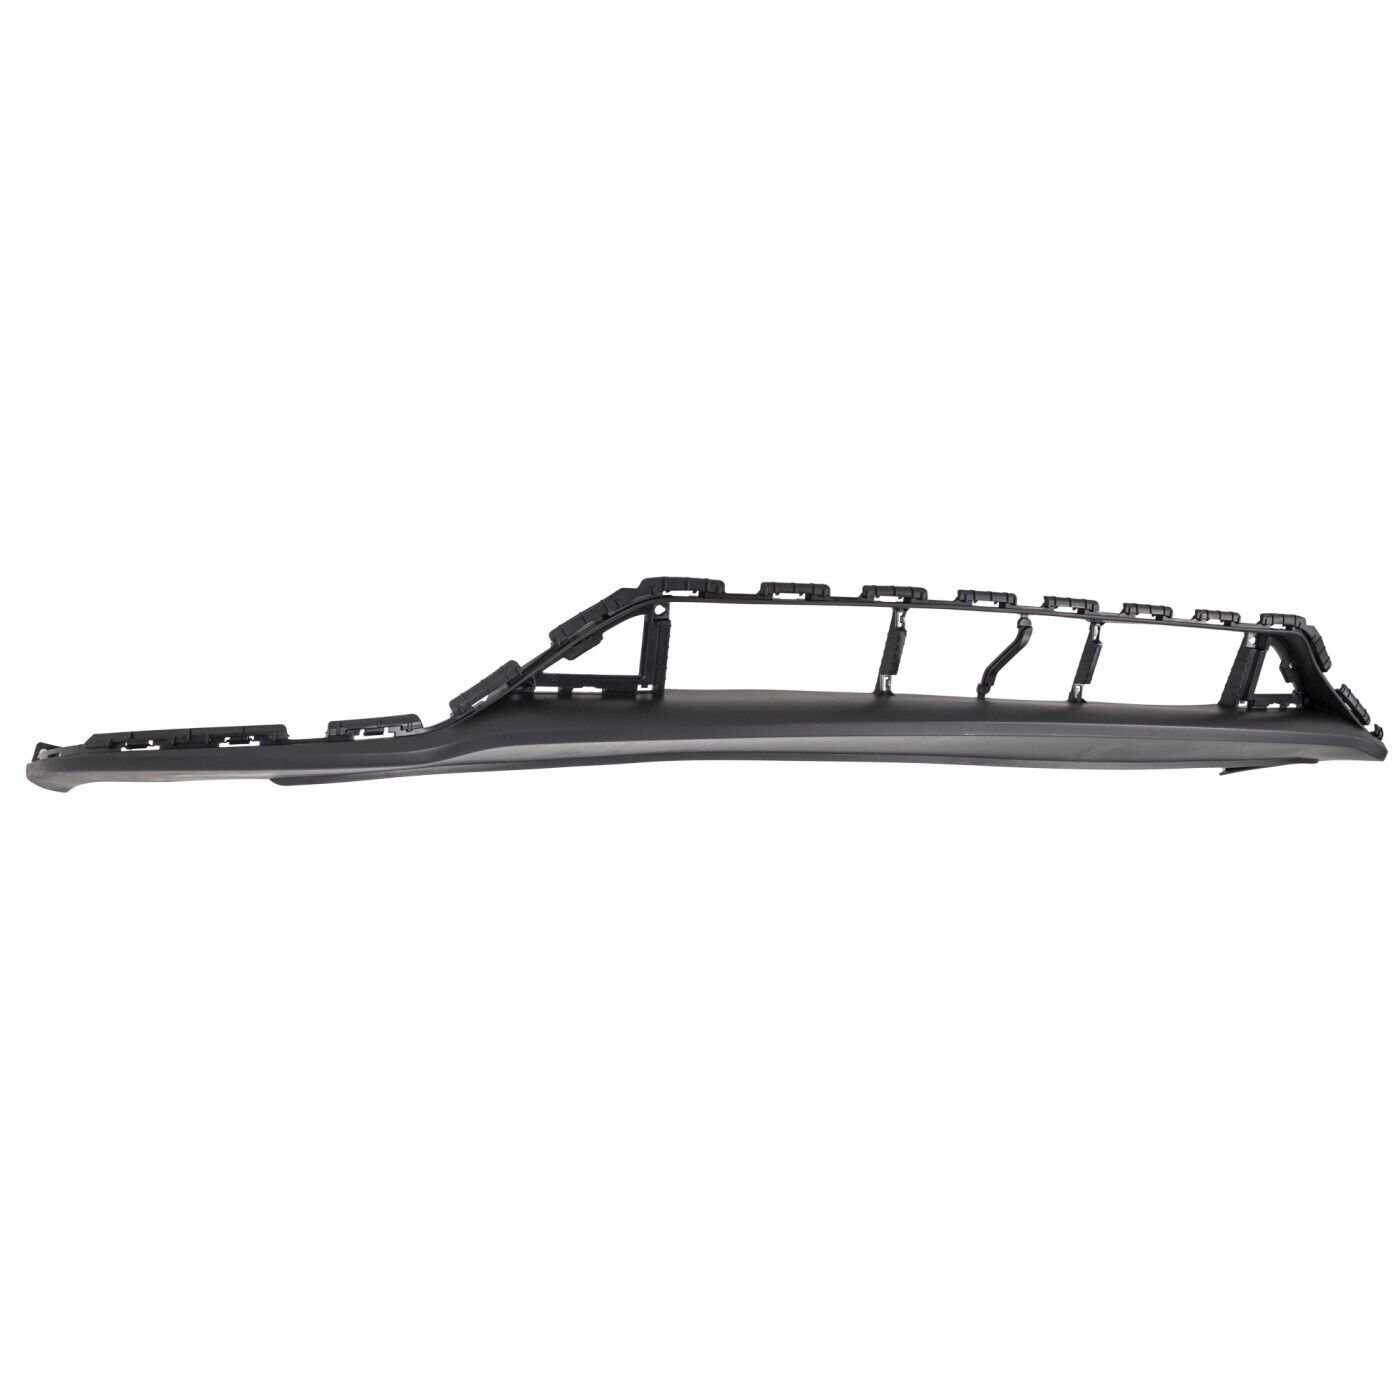 2020-2022 HYUNDAI SONATA; Front Bumper Cover lower; Preferred/SE Painted to Match